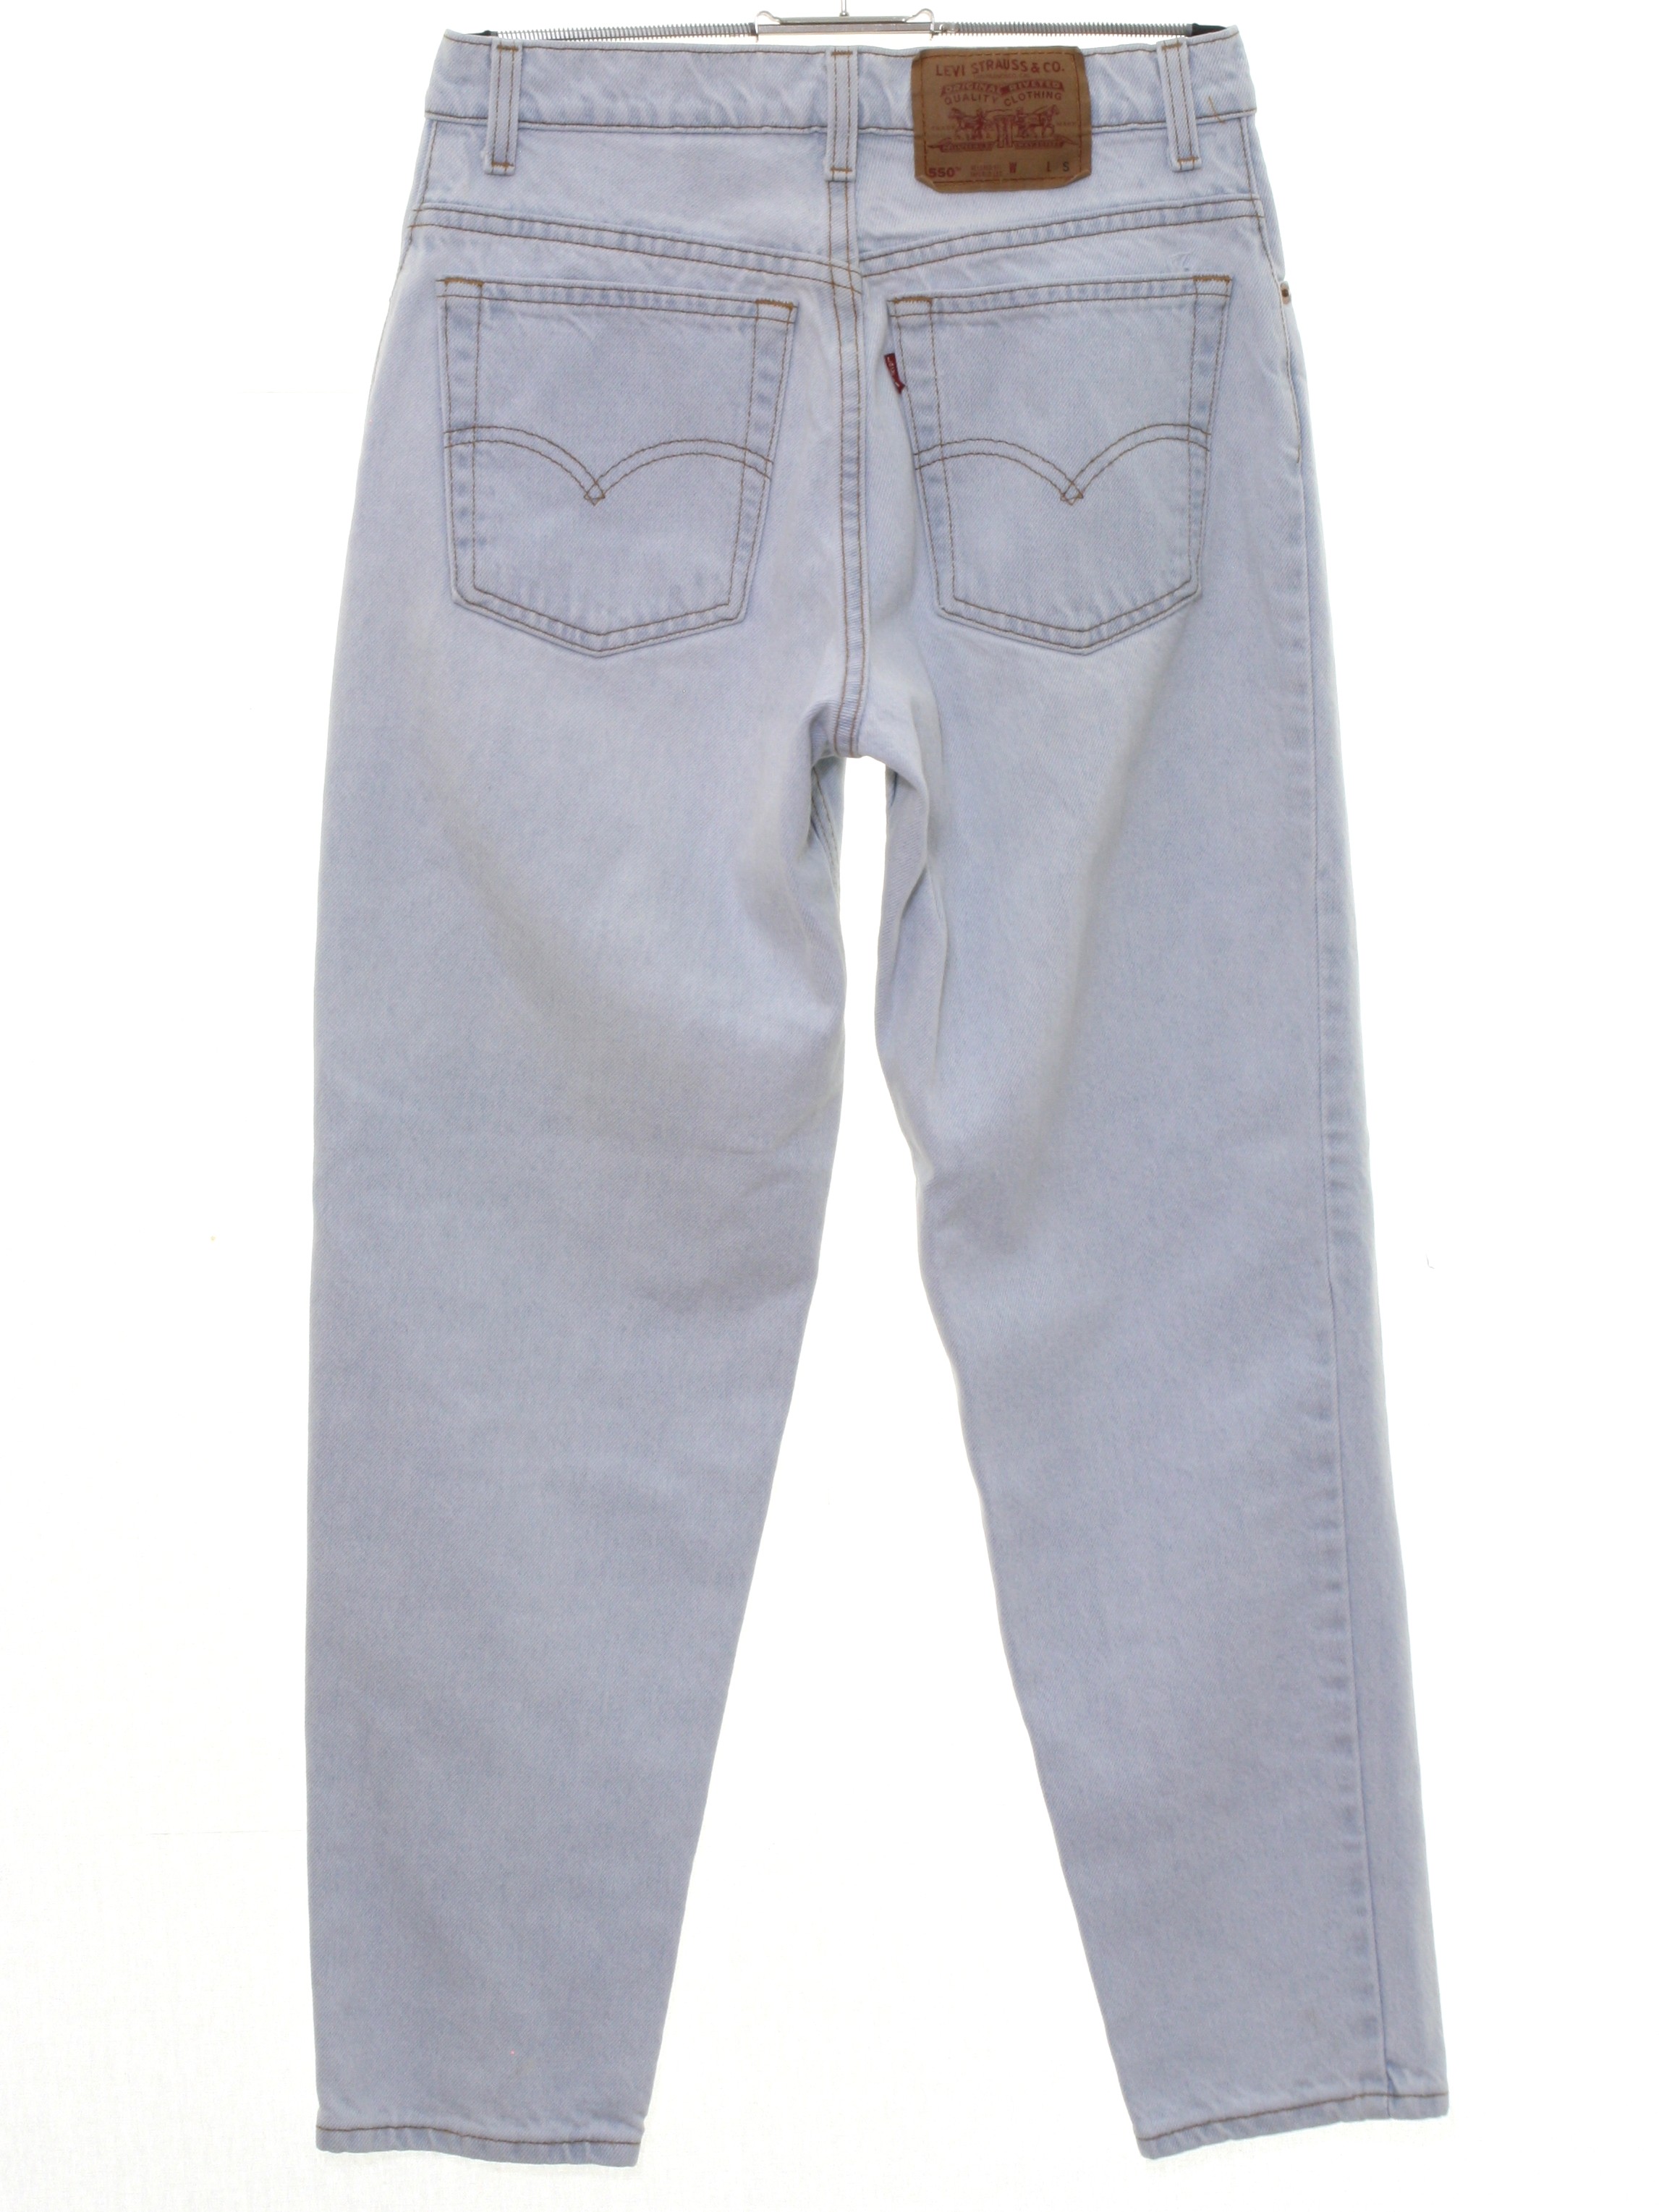 levi's 550 relaxed fit womens